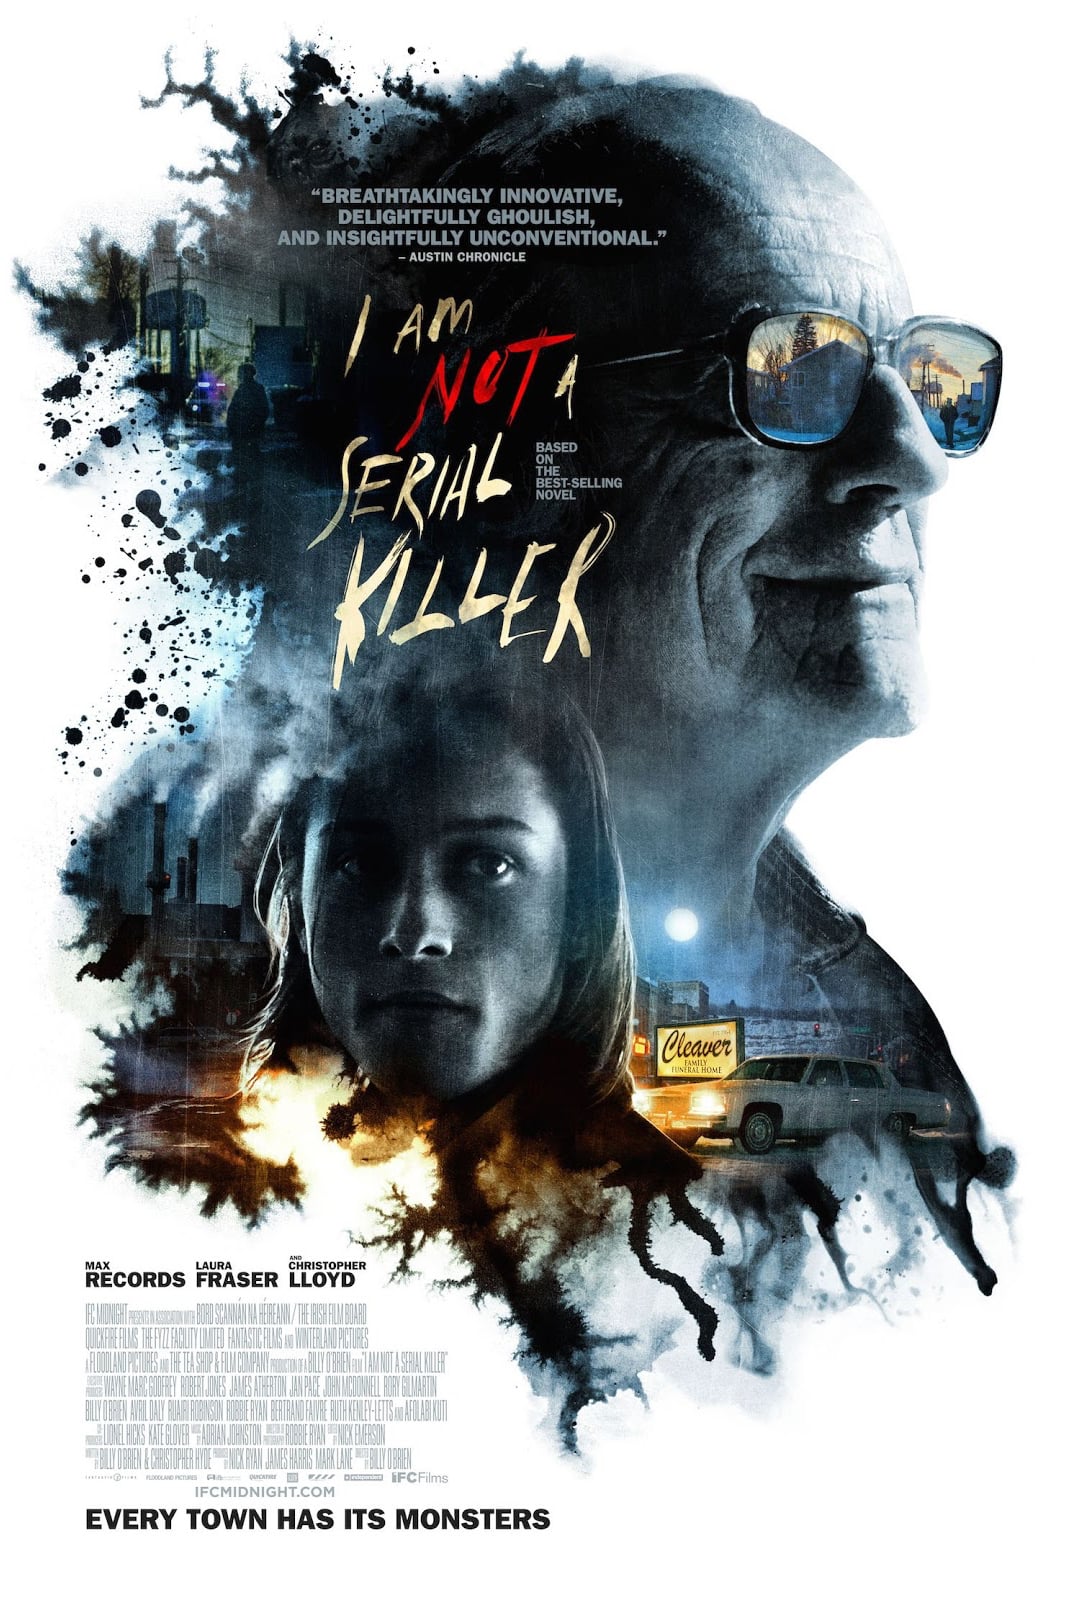 Poster for the movie "I Am Not a Serial Killer"